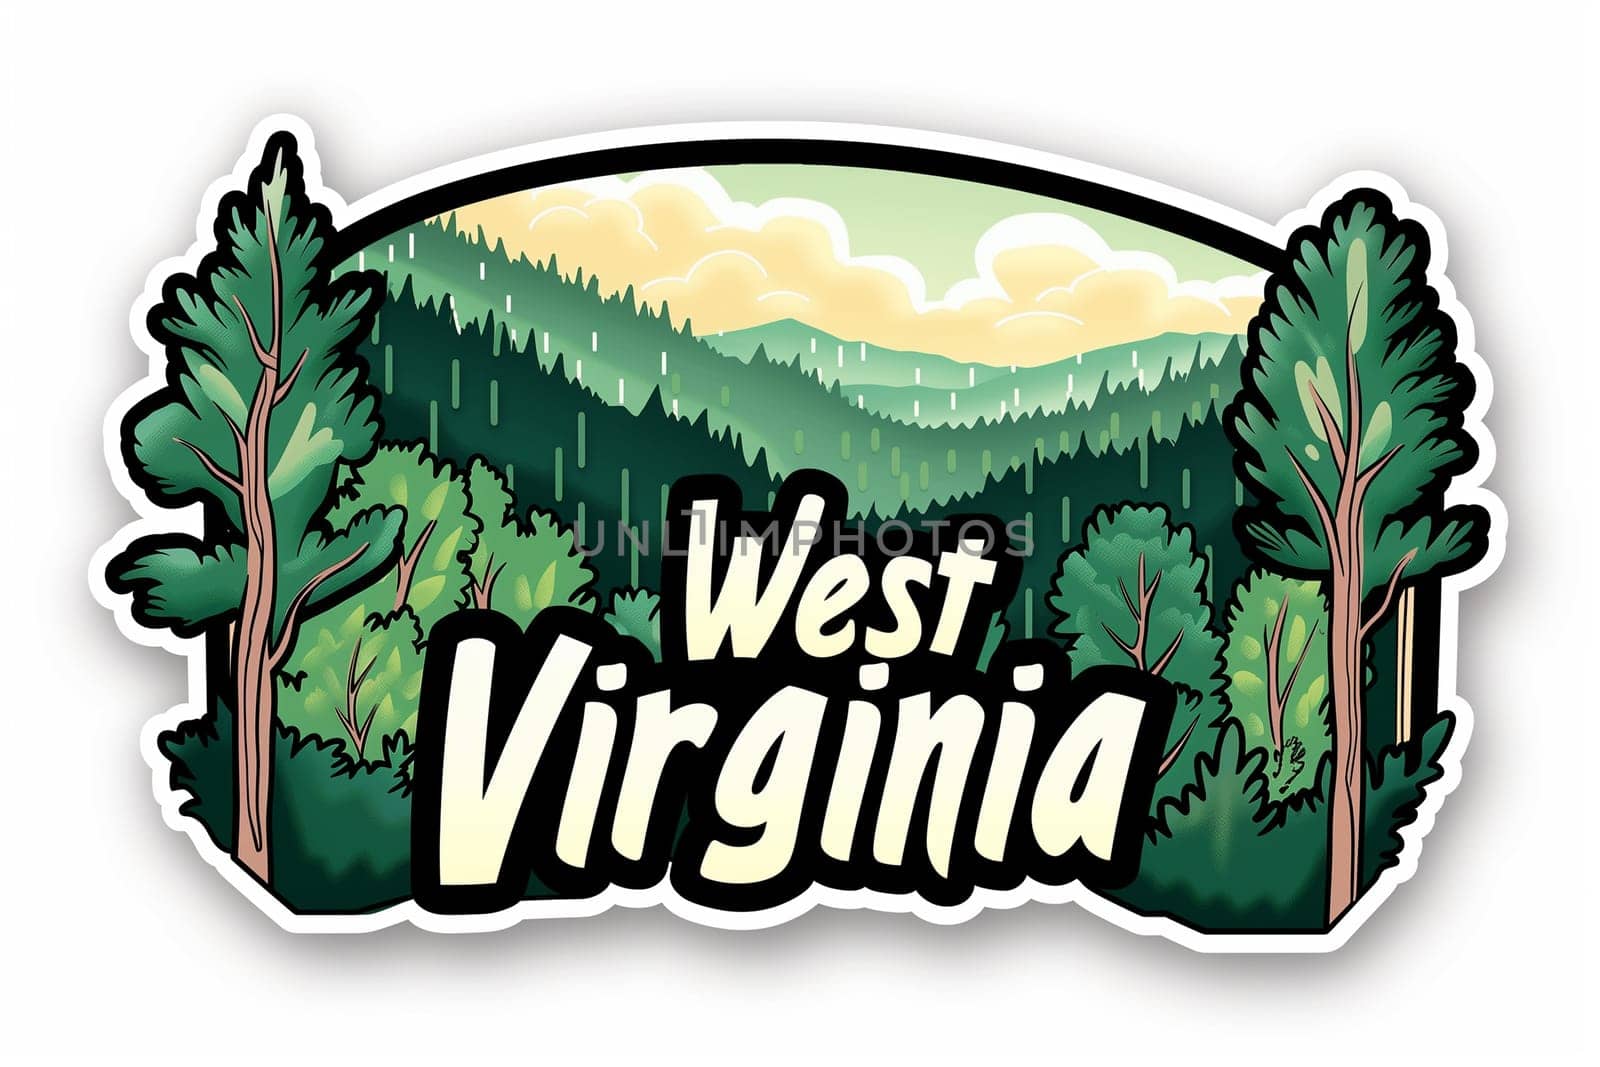 Sticker With the Words West Virginia by Sd28DimoN_1976